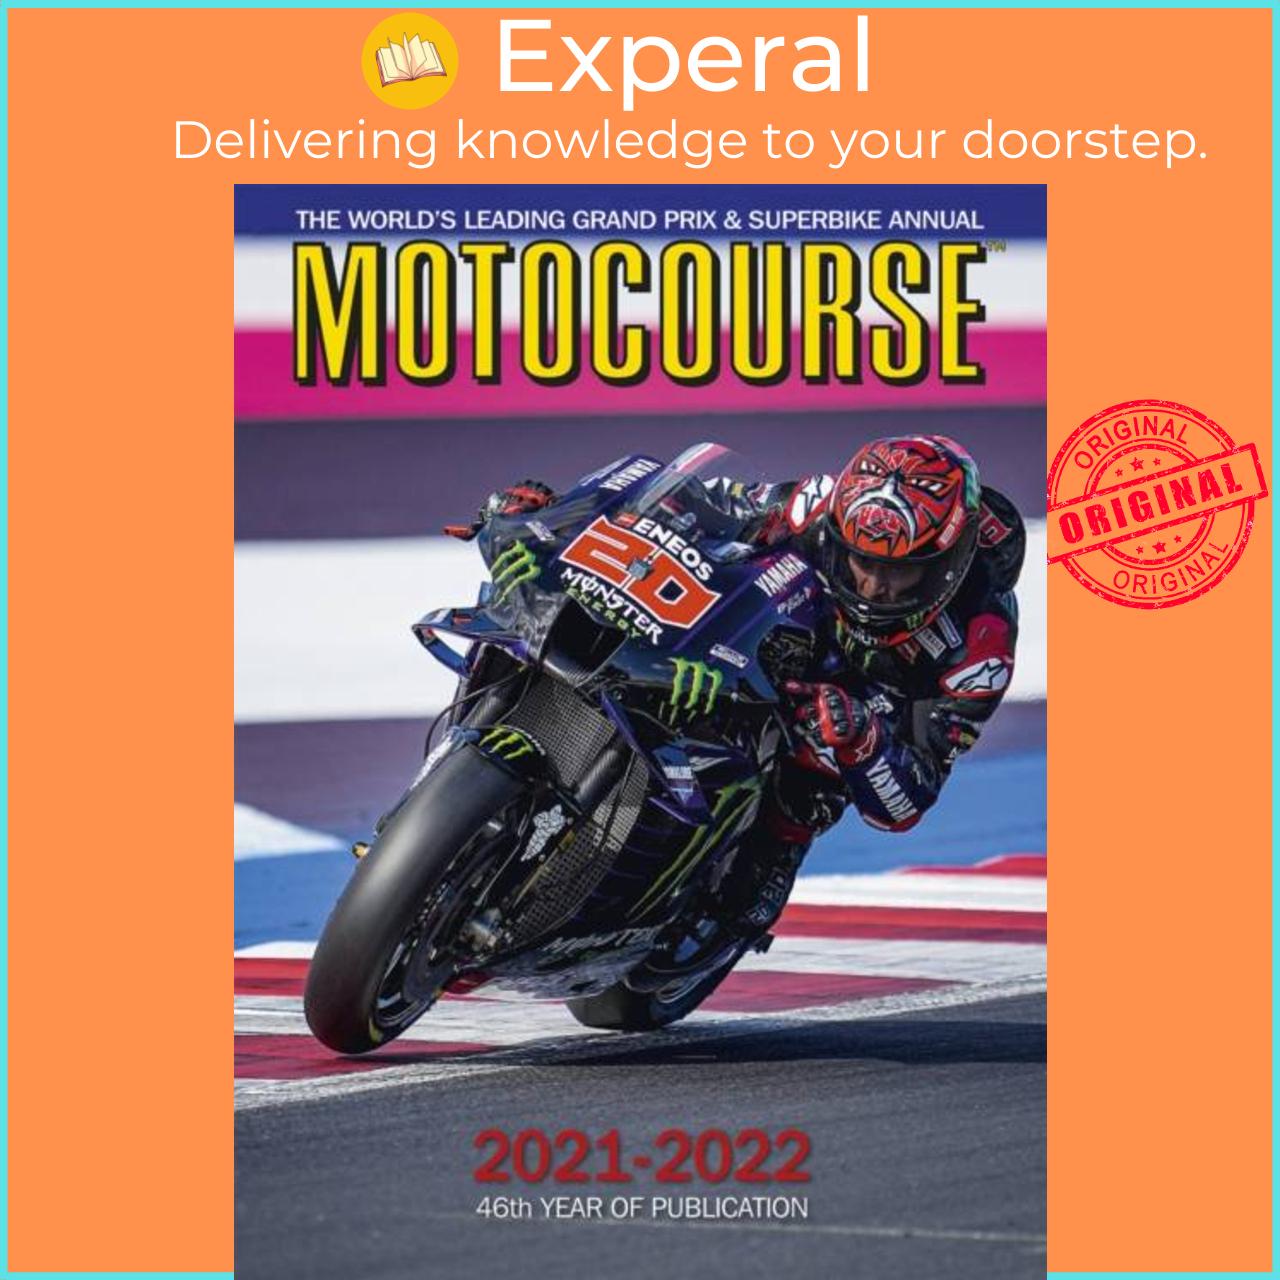 Sách - MOTOCOURSE 2021-22 Annual - The World's Leading Grand Prix & Superbike A by Michael Scott (UK edition, hardcover)